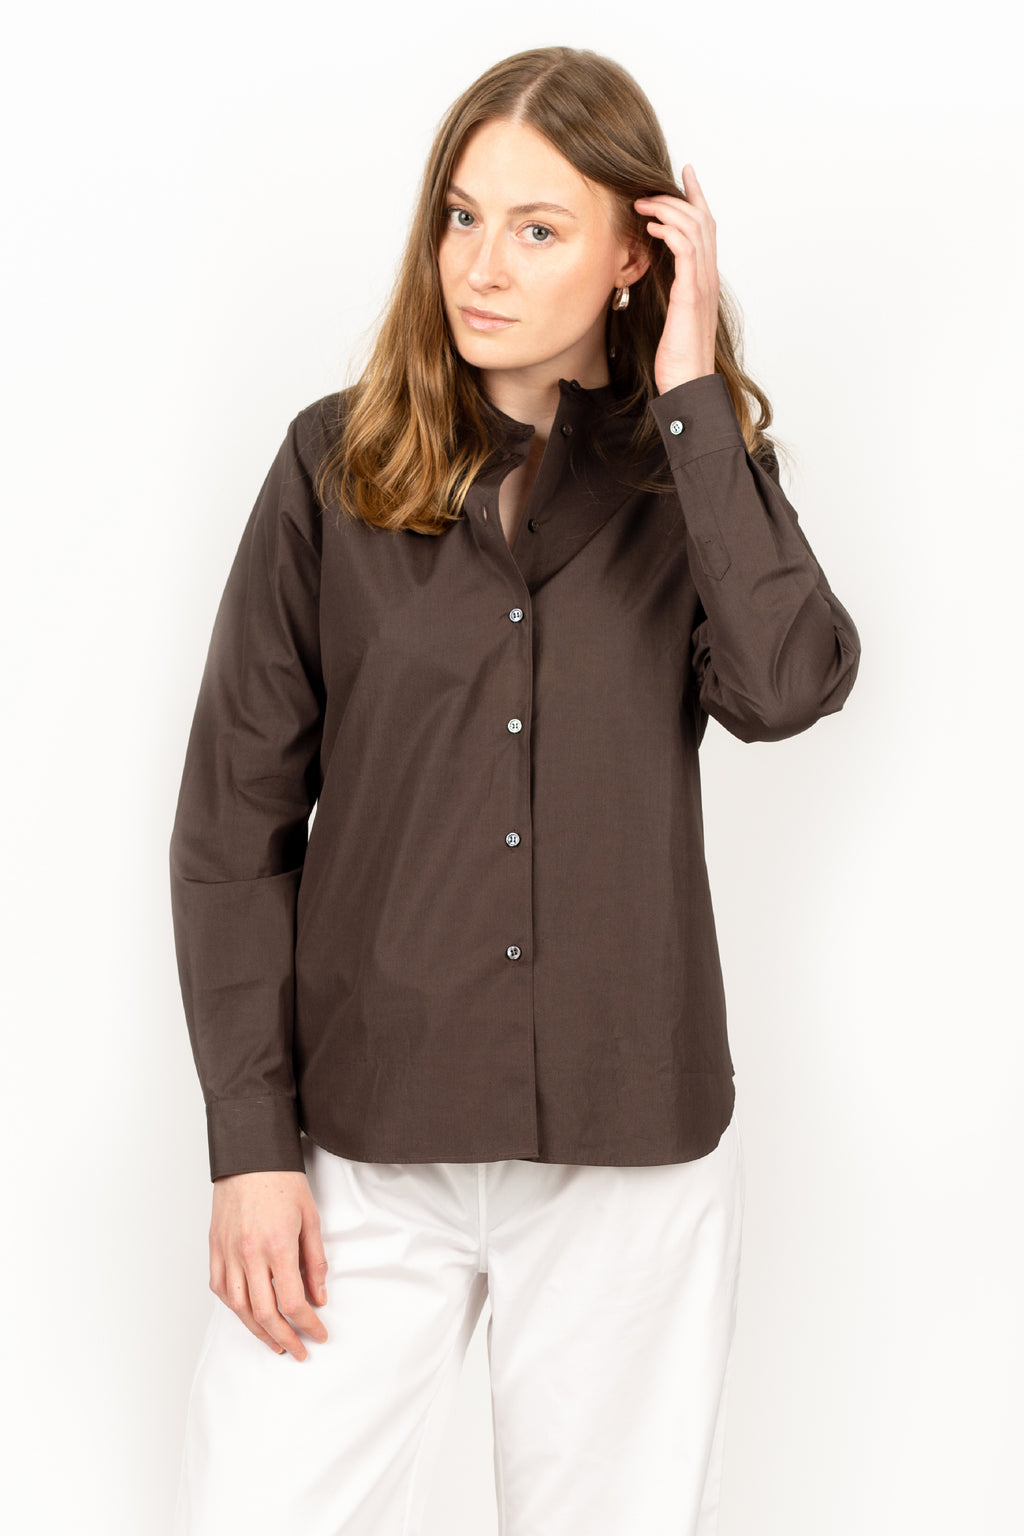 The Classic Shirt Brown Cotton